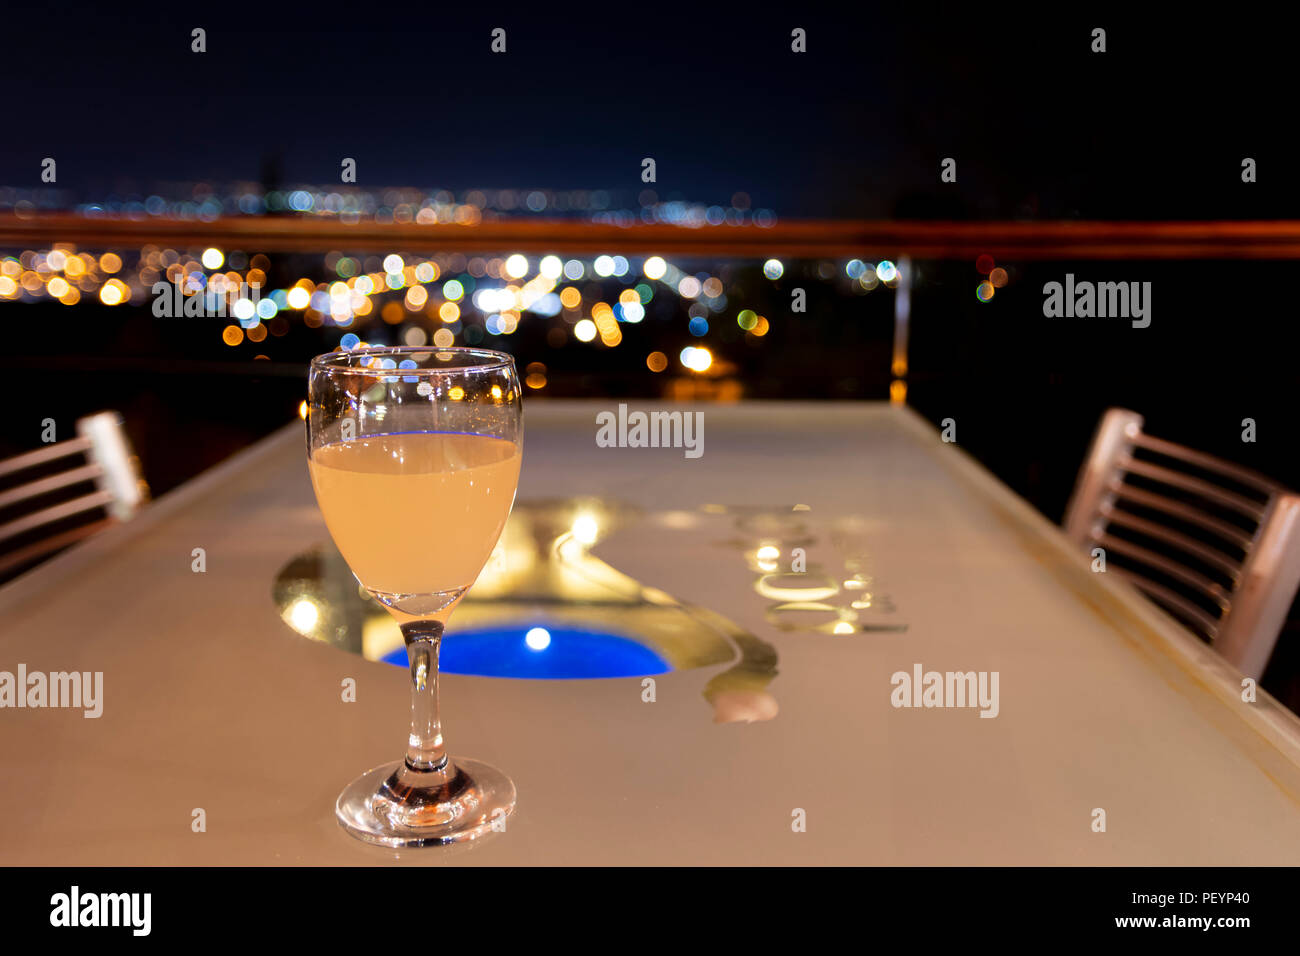 Drink on a table in a restaurant with the view of the ciy lights blurred on the background Stock Photo